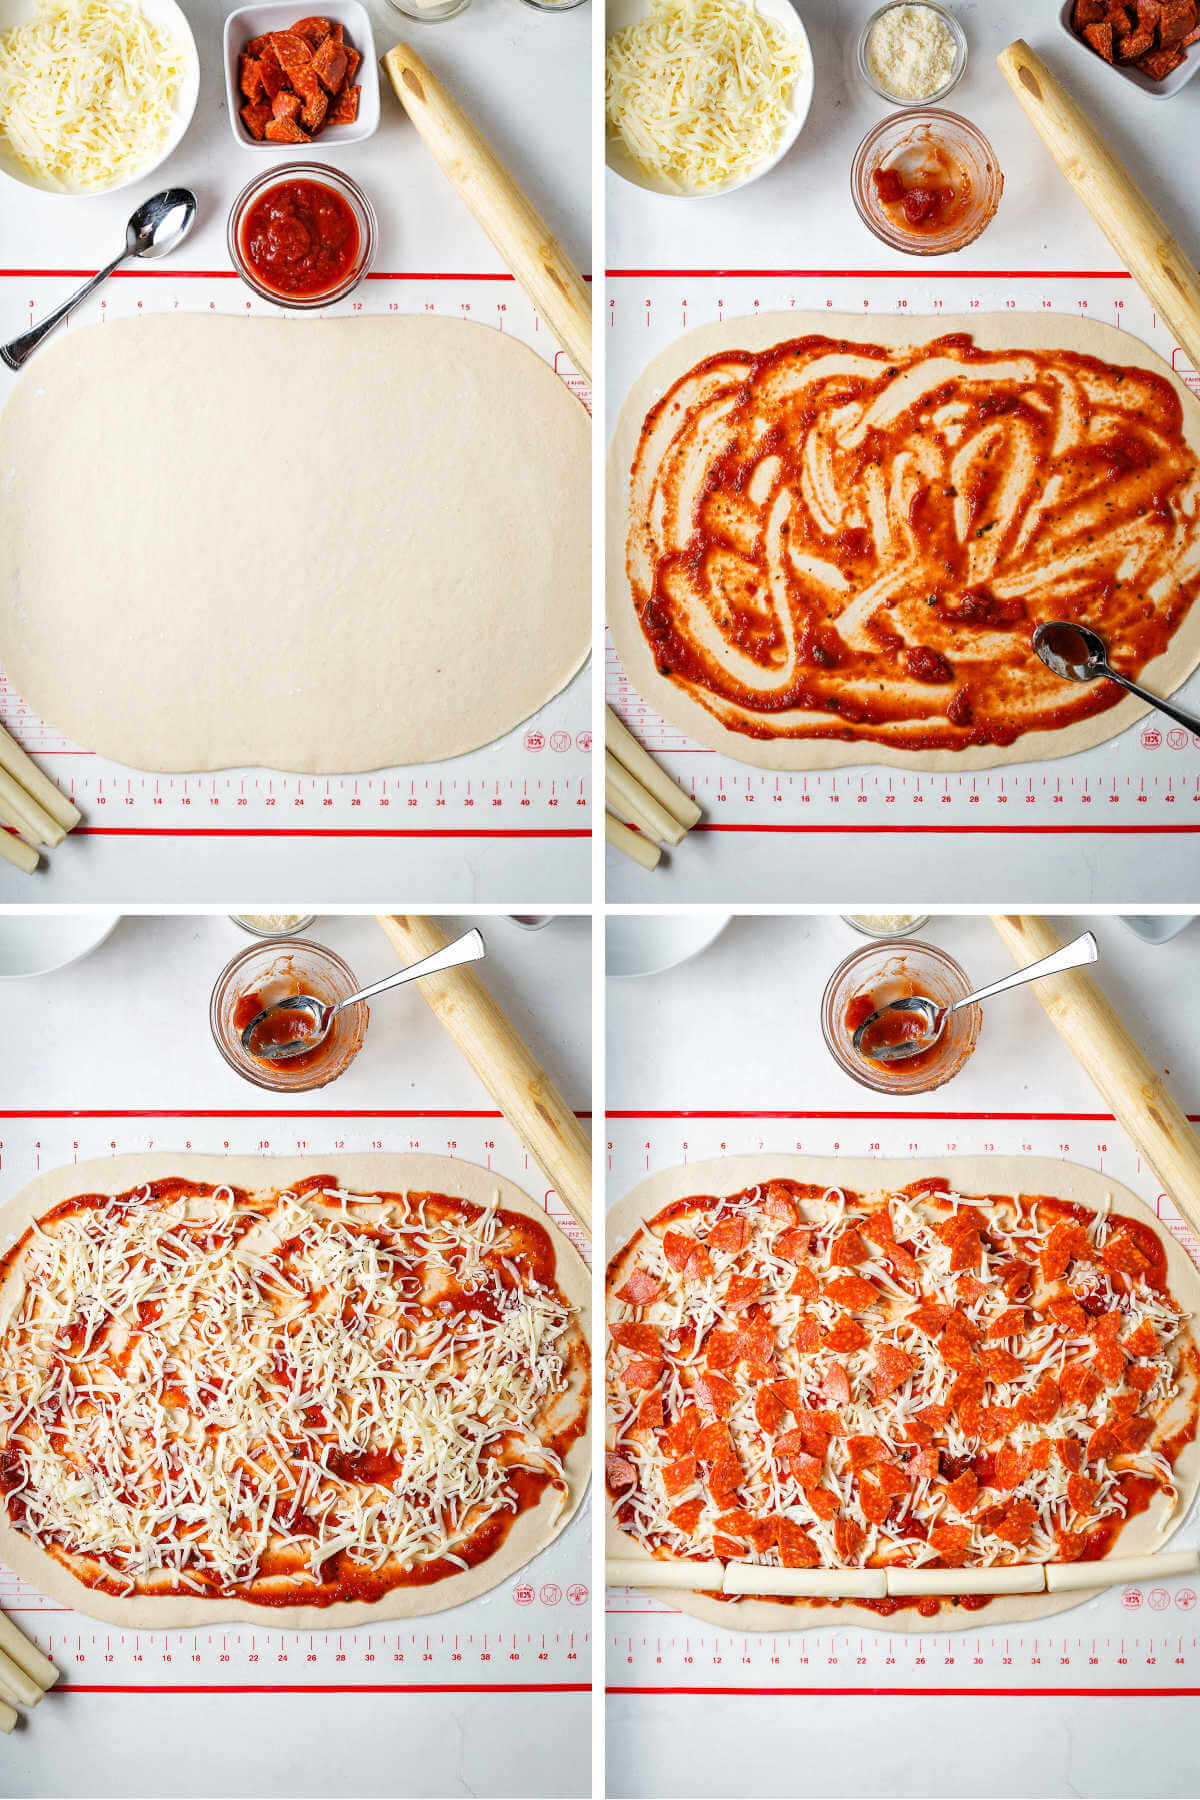 process steps for assembling pepperoni pizza rolls; roll out dough and top with sauce, cheese, and pepperoni.